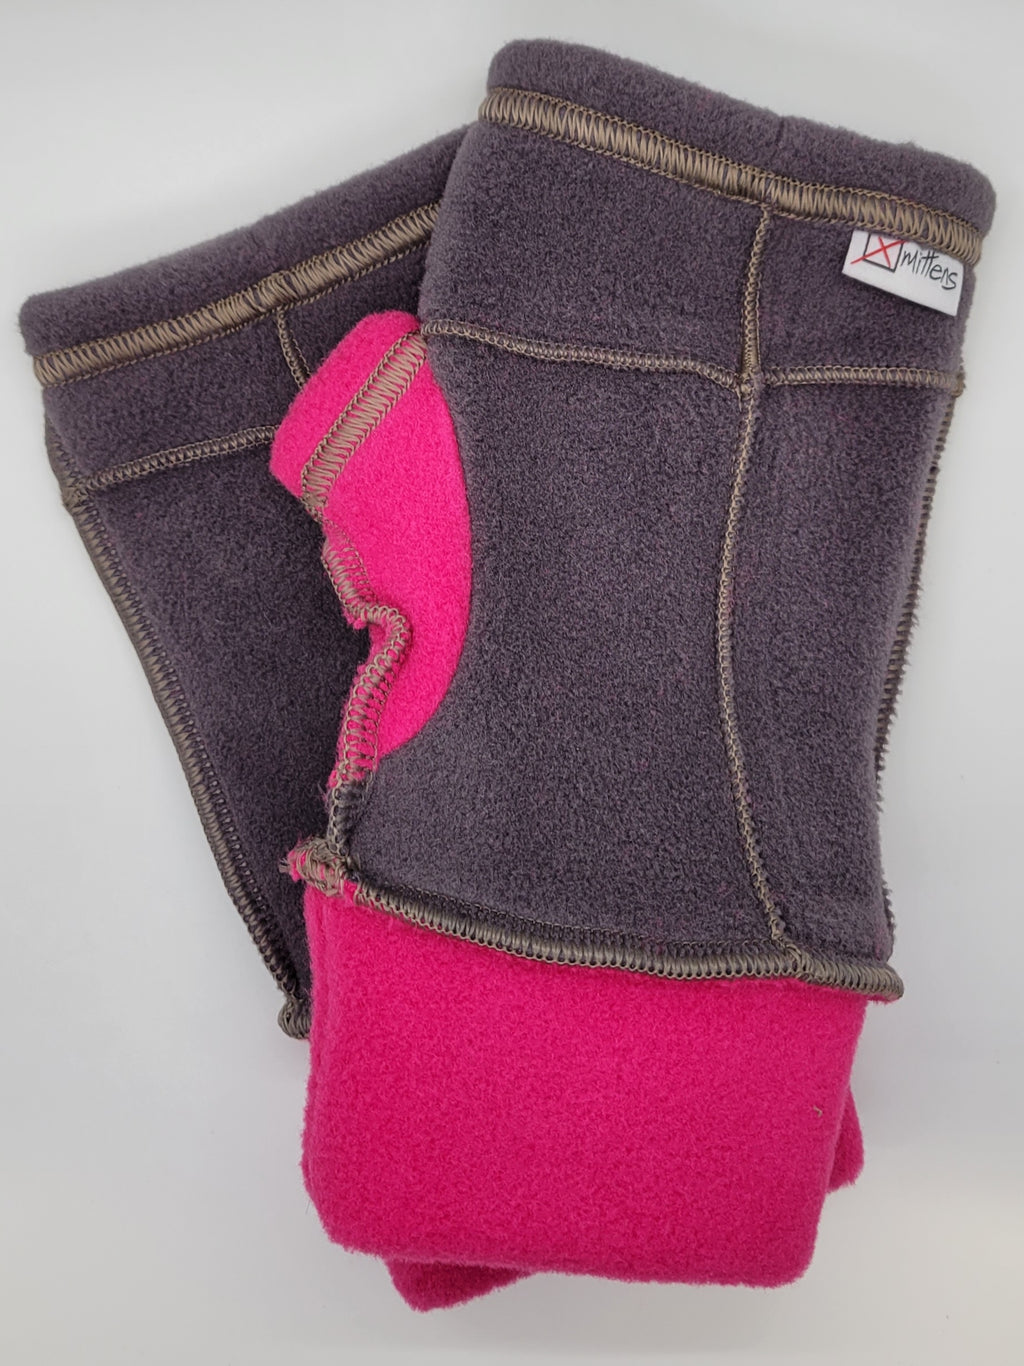 Cuffed Xmittens: Gray Body & Pink Thumbs with Silver Thread